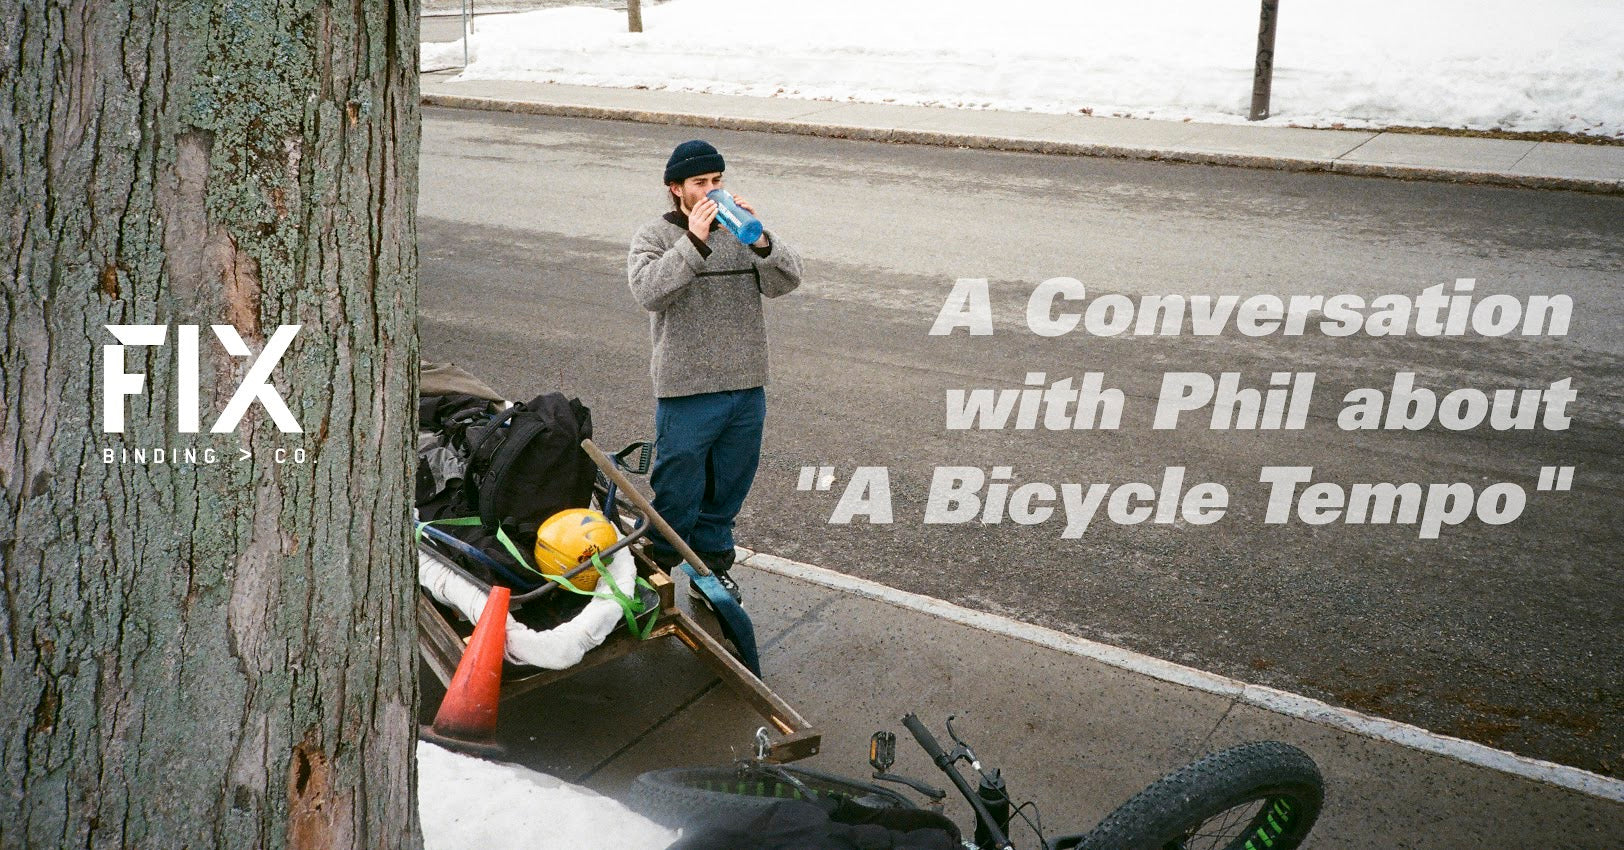 A Conversation With Phil About "A Bicycle Tempo"